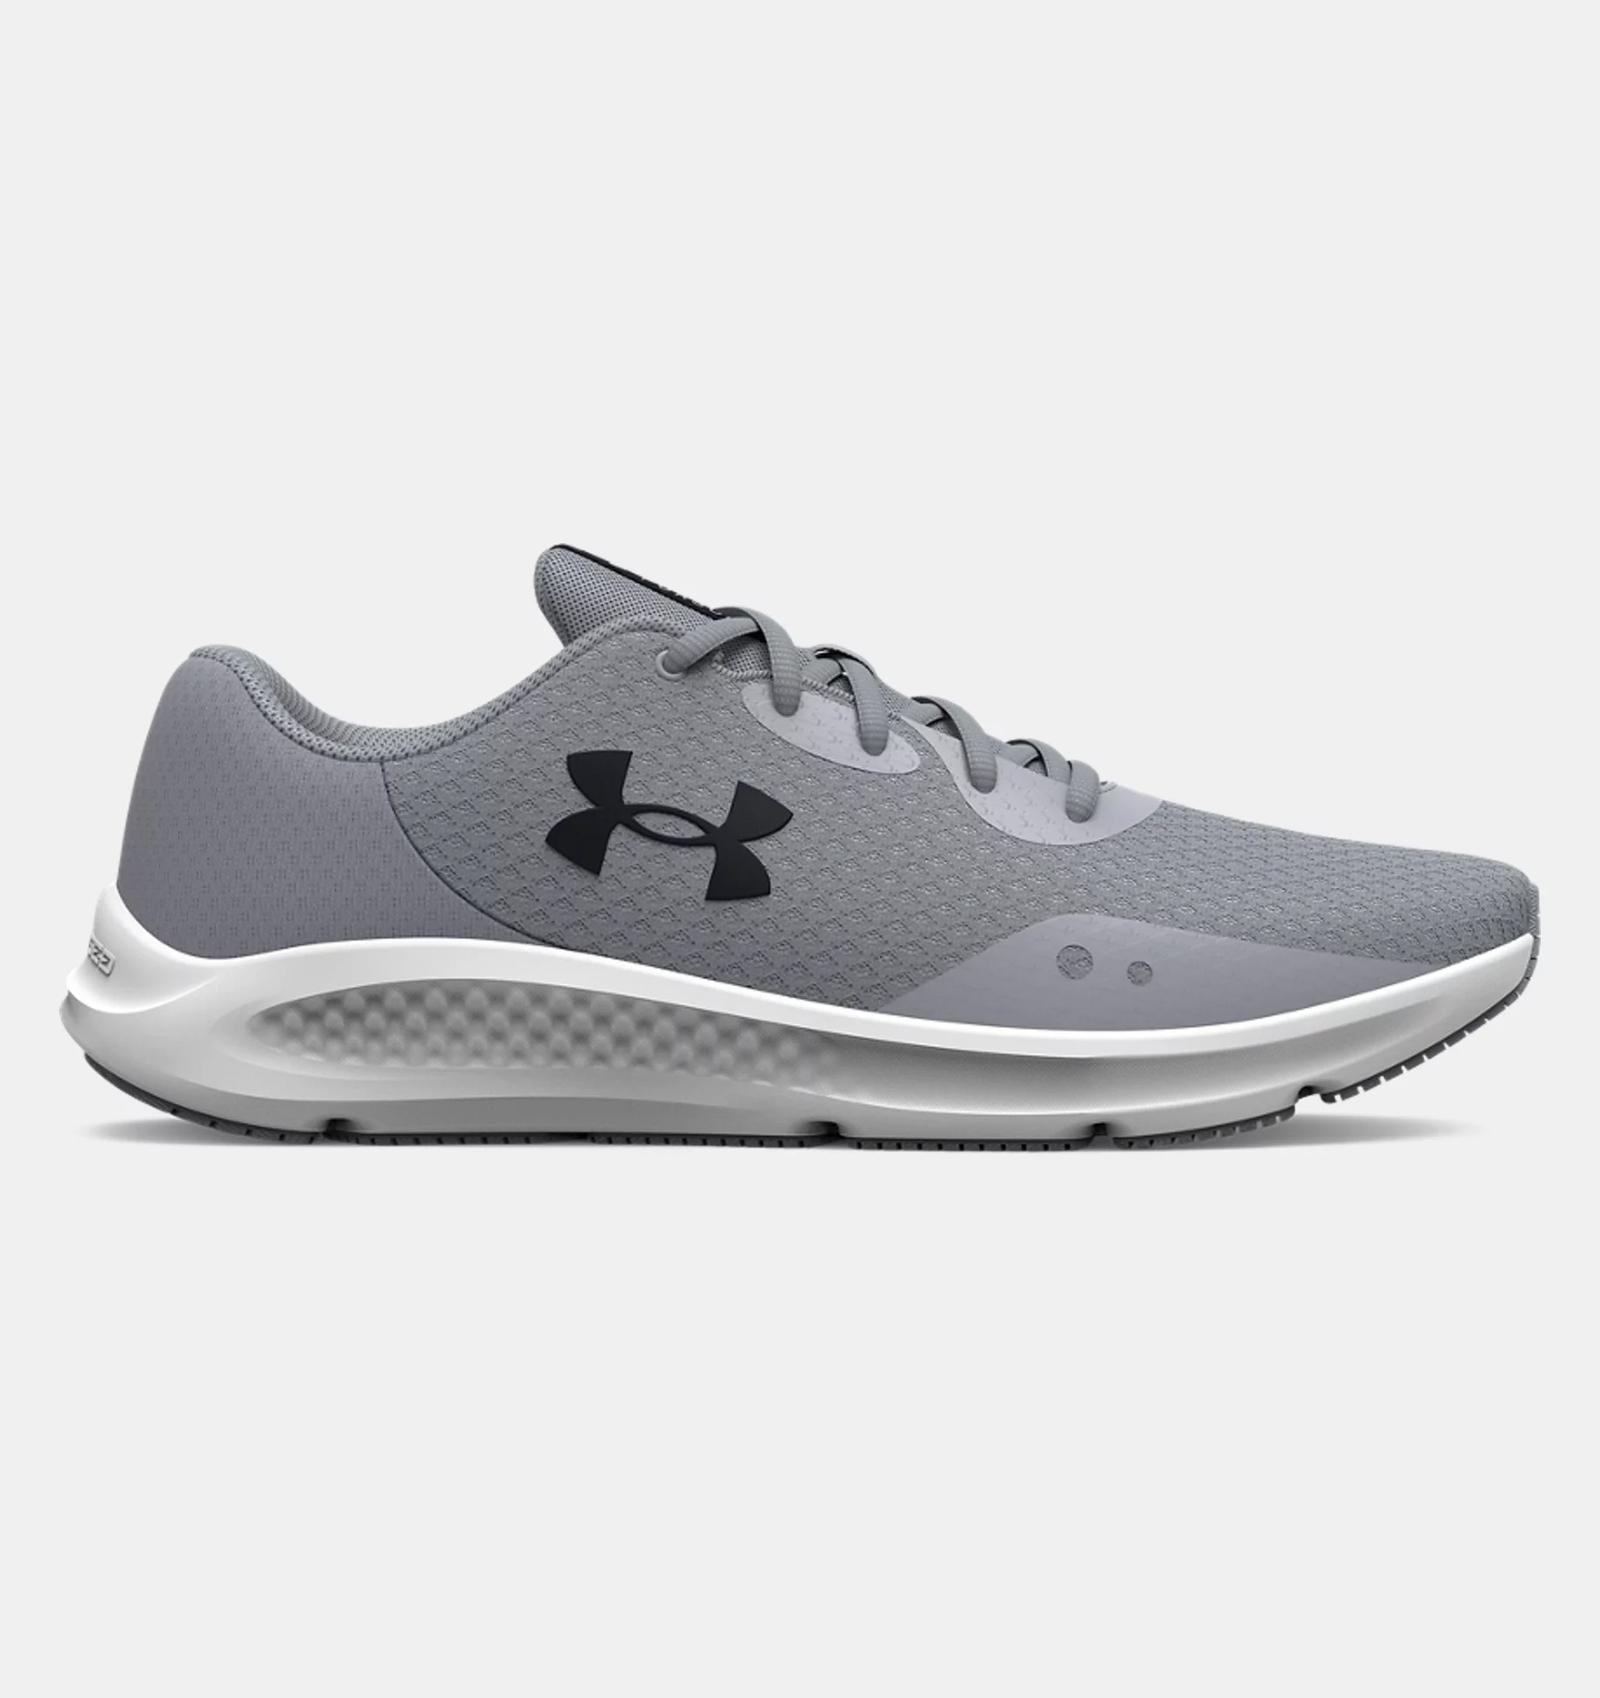 Under Armour Men's Charge Pursuit Gray Running Shoe